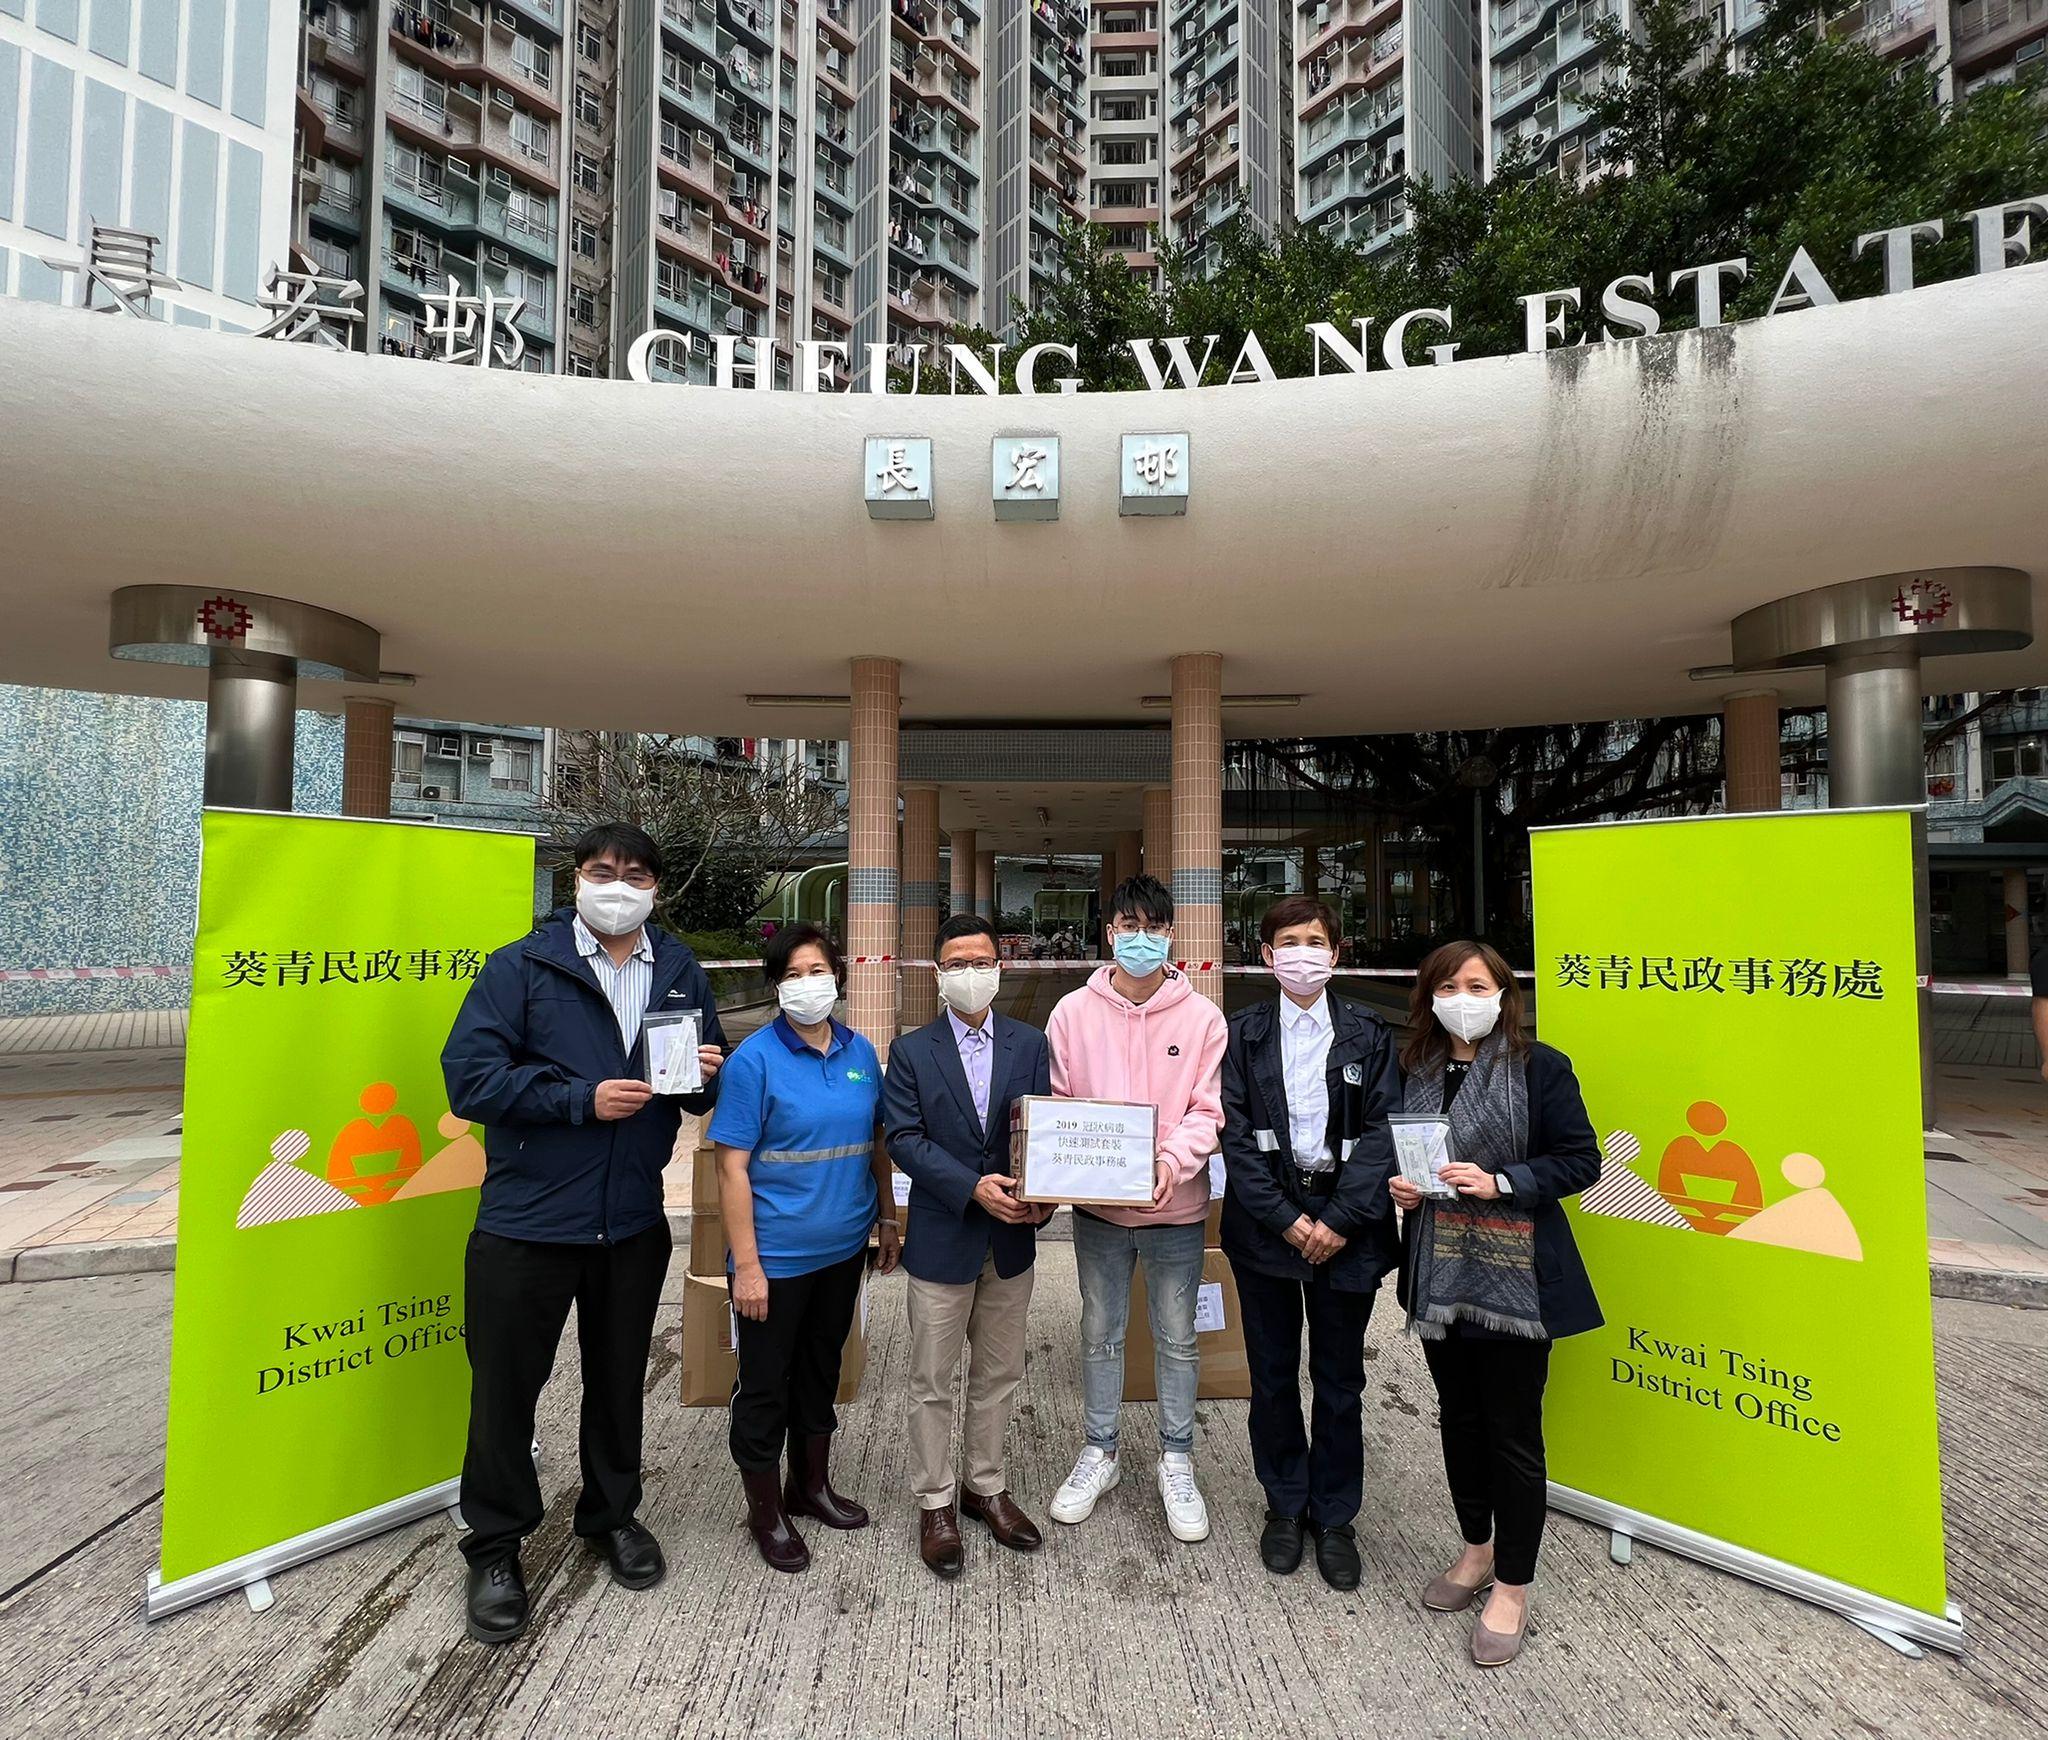 The Kwai Tsing District Office today (February 10) distributed rapid test kits to households, cleansing workers and property management staff of Wang Sin House, Wang Yee House, Wang Sum House, Wang Yung House for voluntary testing through the property management company of Cheung Wang Estate.